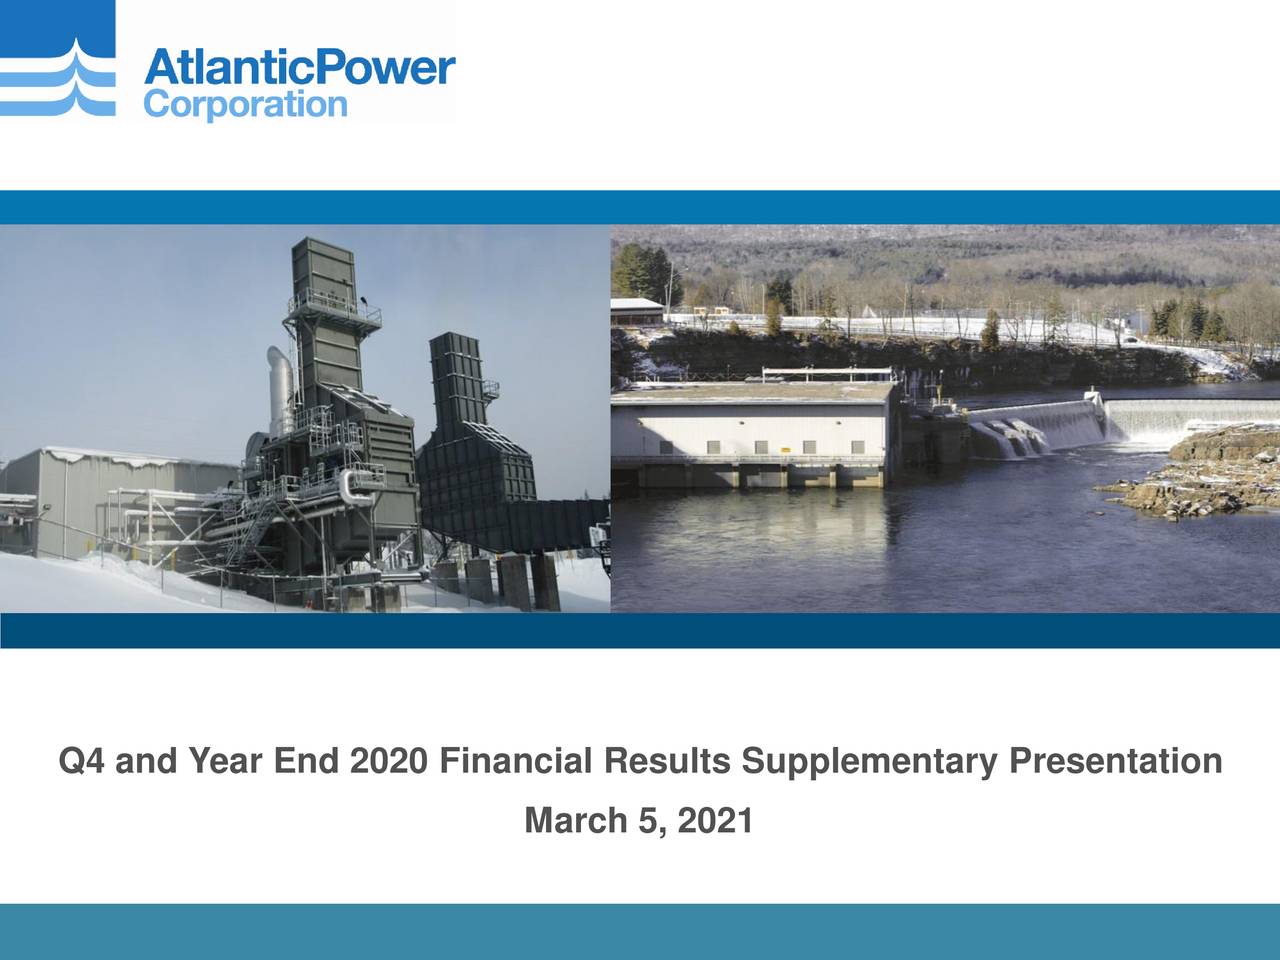 Q4 and Year End 2020 Financial Results Supplementary Presentation